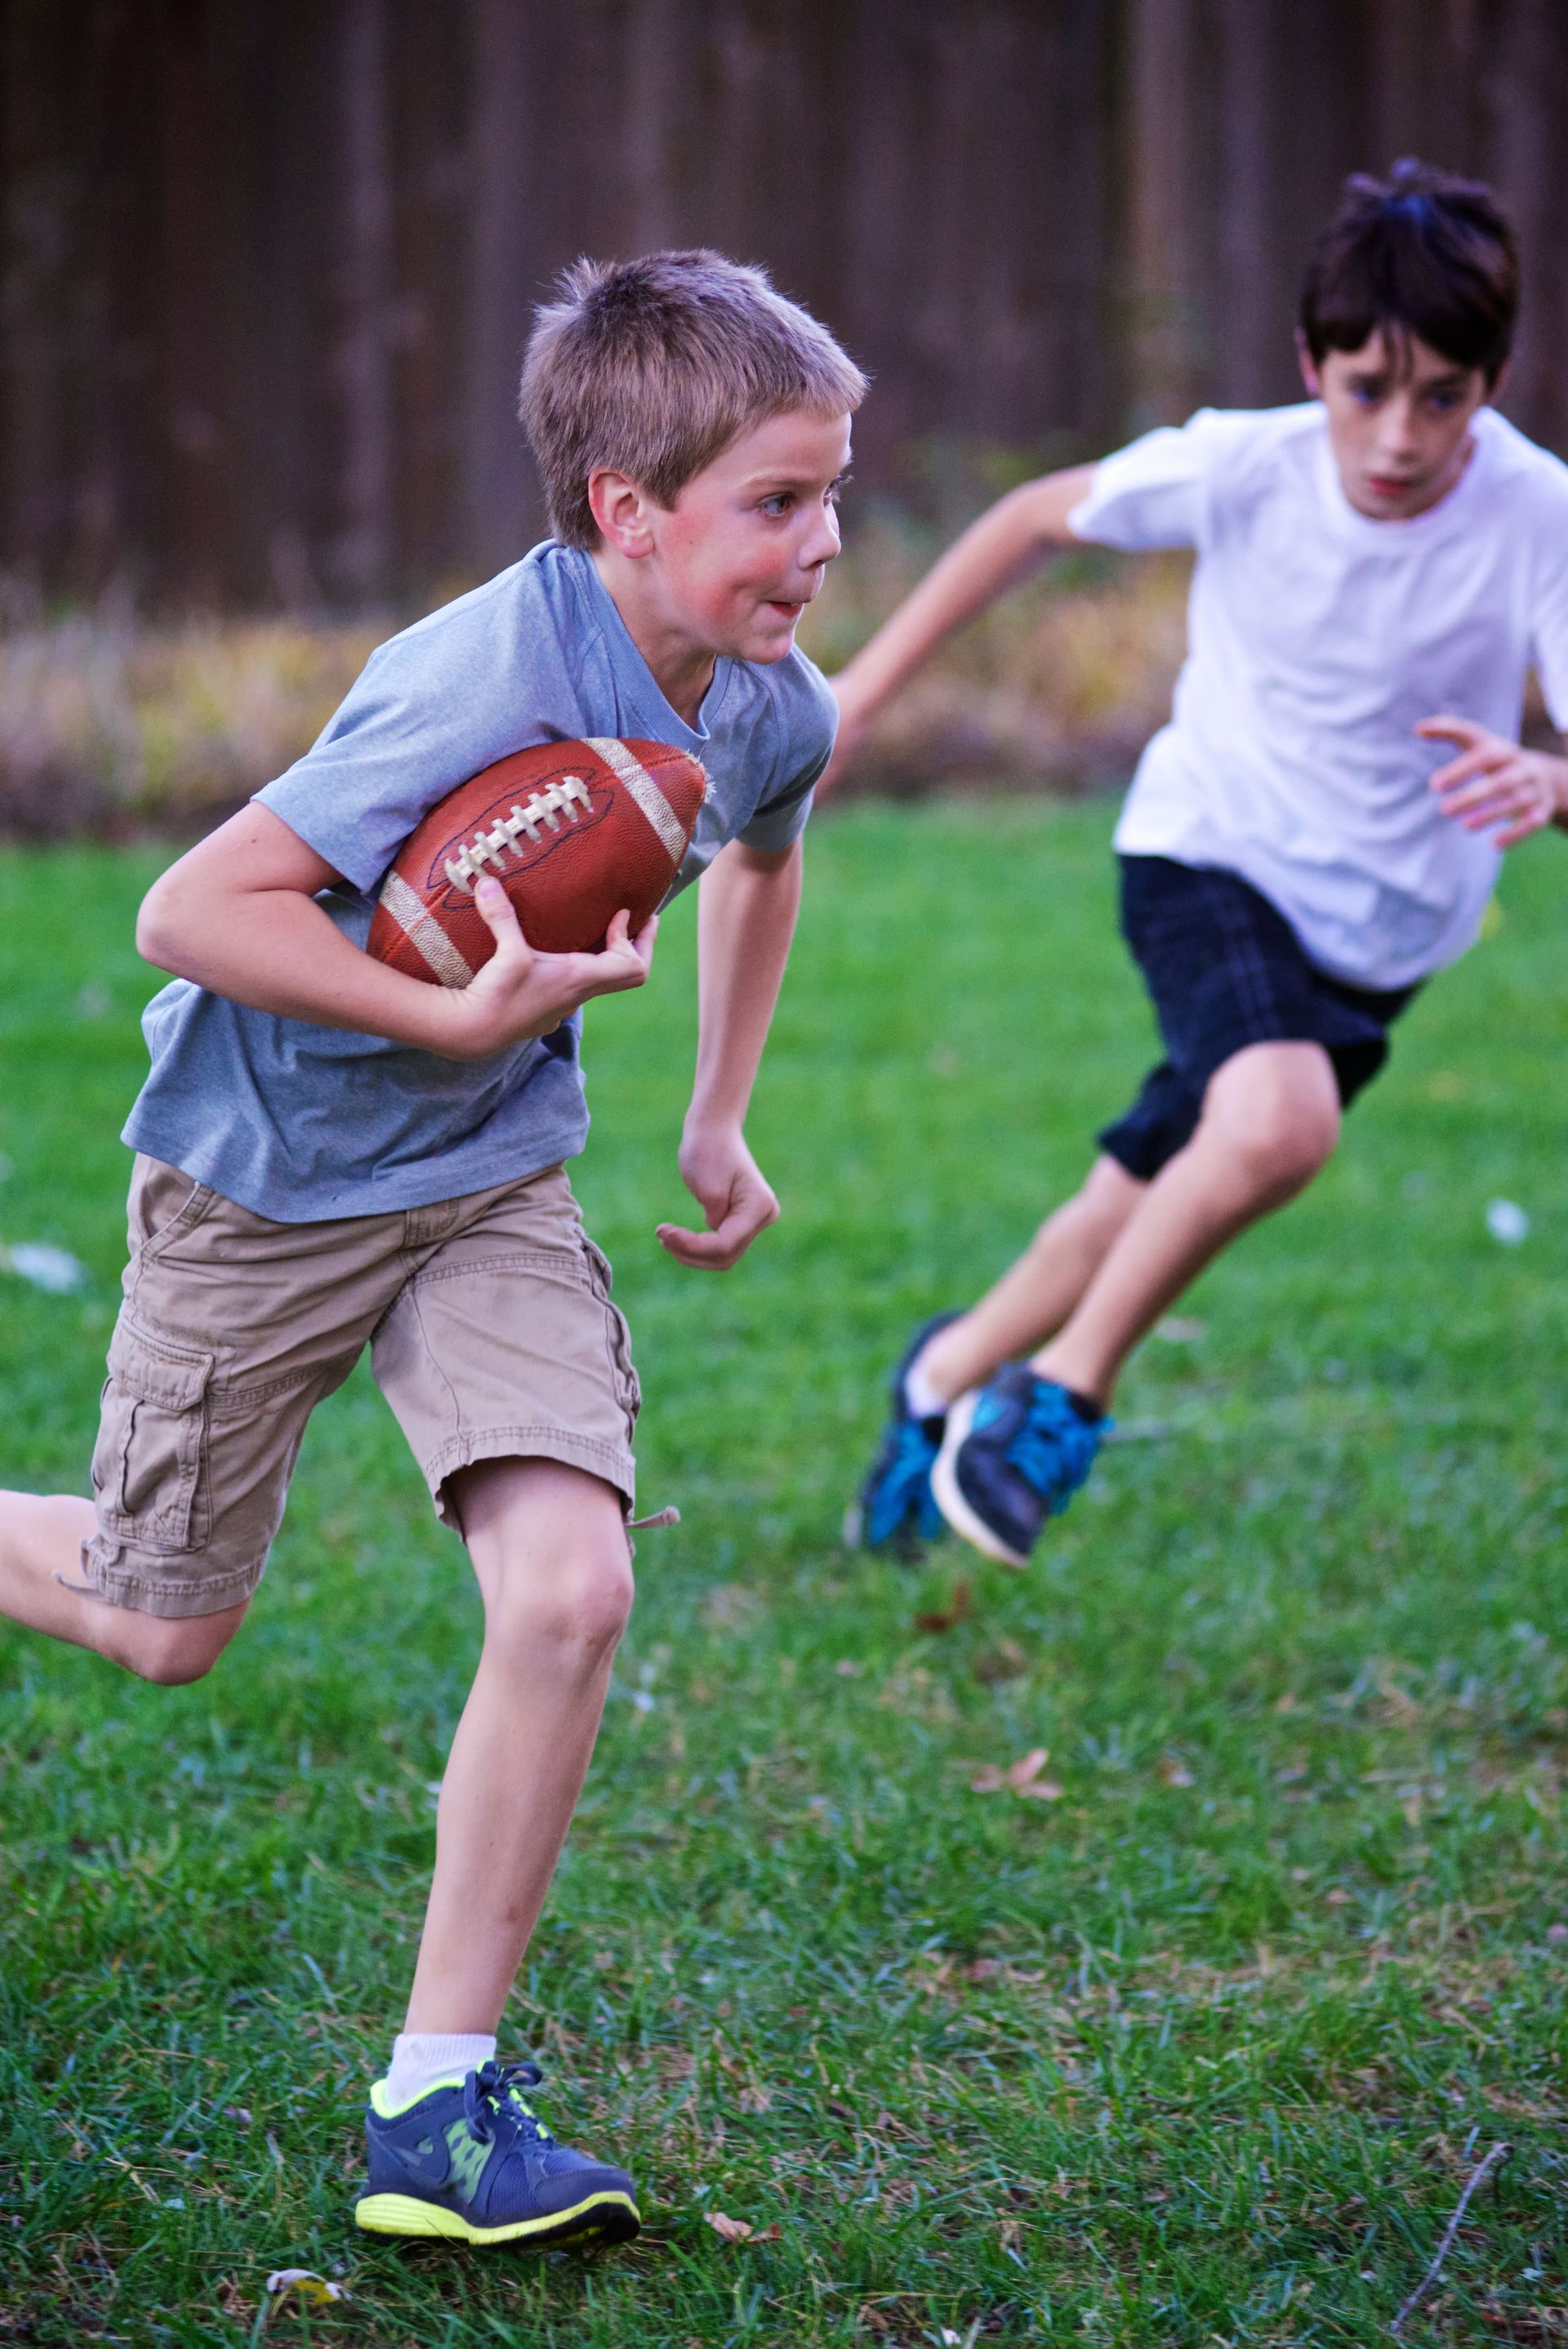 Two boys playing football together.